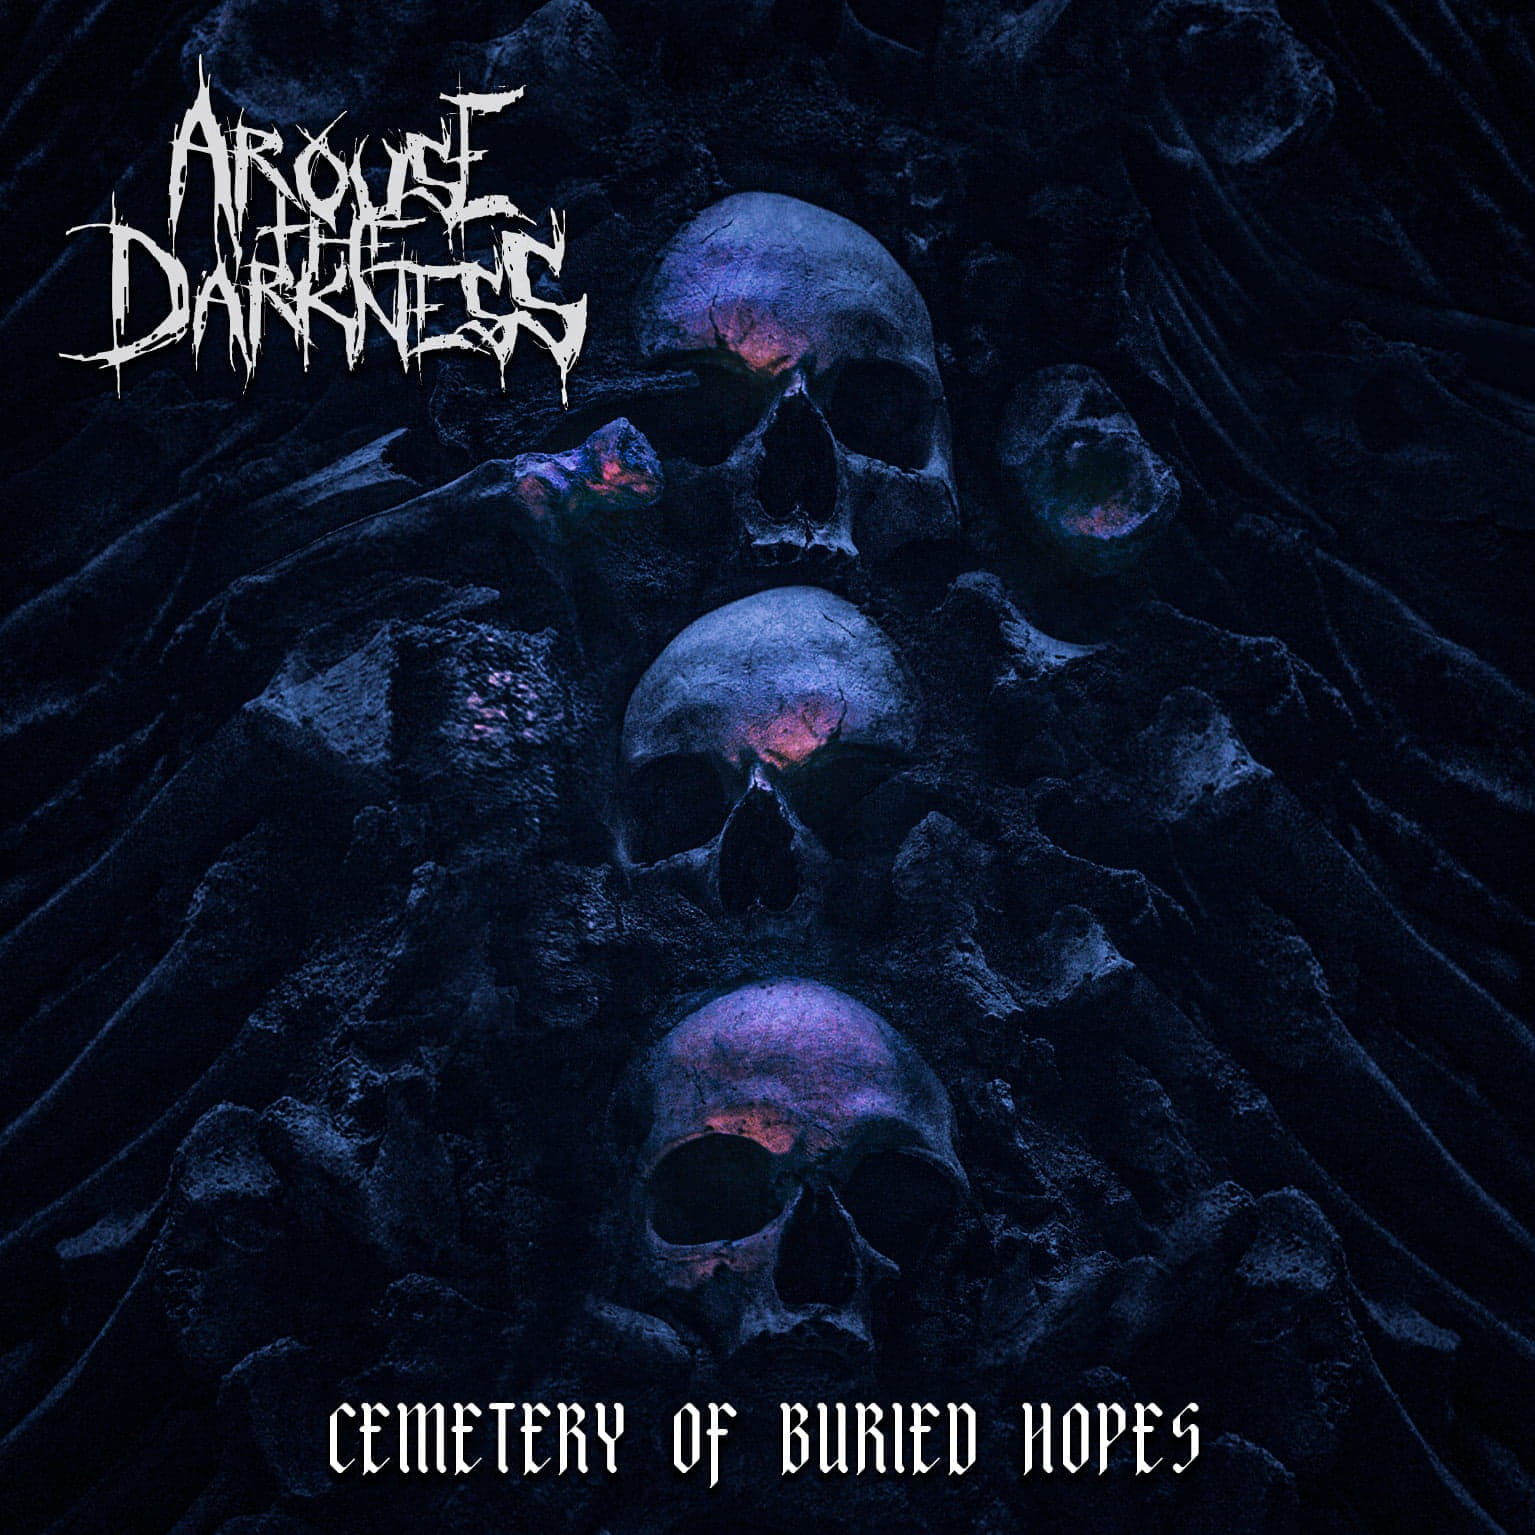 Arouse The Darkness - Cemetery Of Buried Hopes (2022)